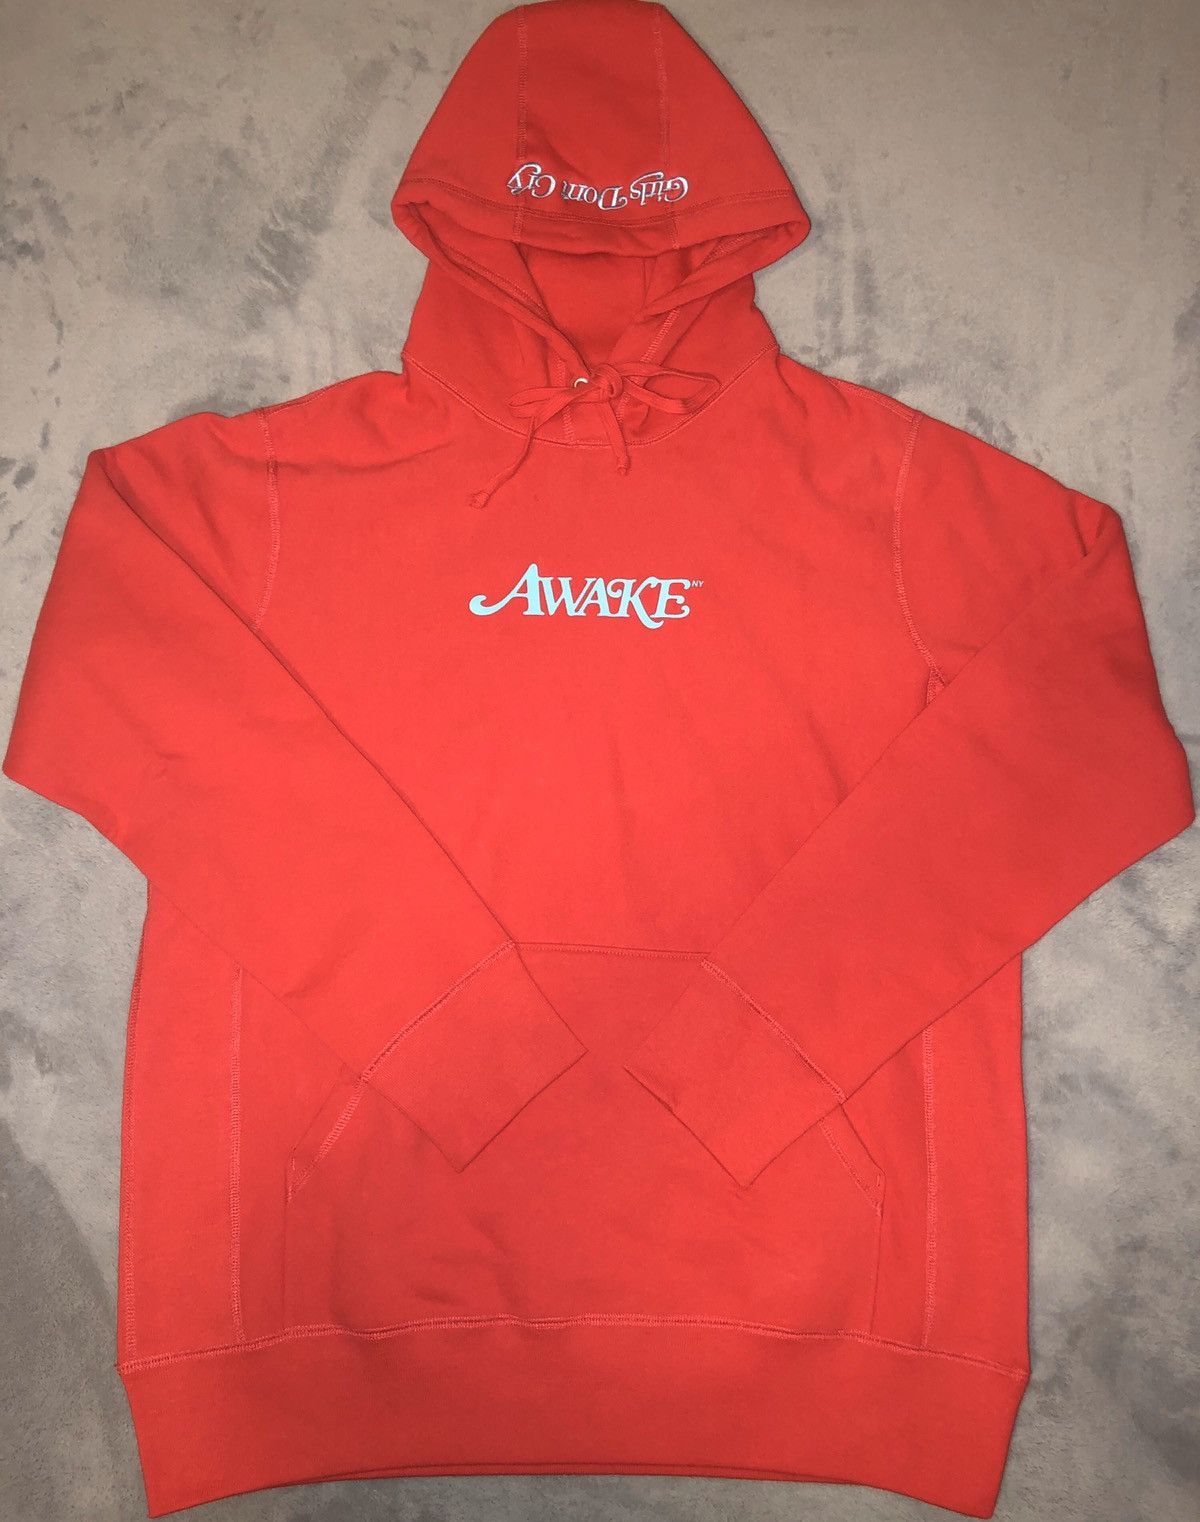 Awake Awake NY x Girls Don't Cry Verdy Day hoodie Large Red | Grailed